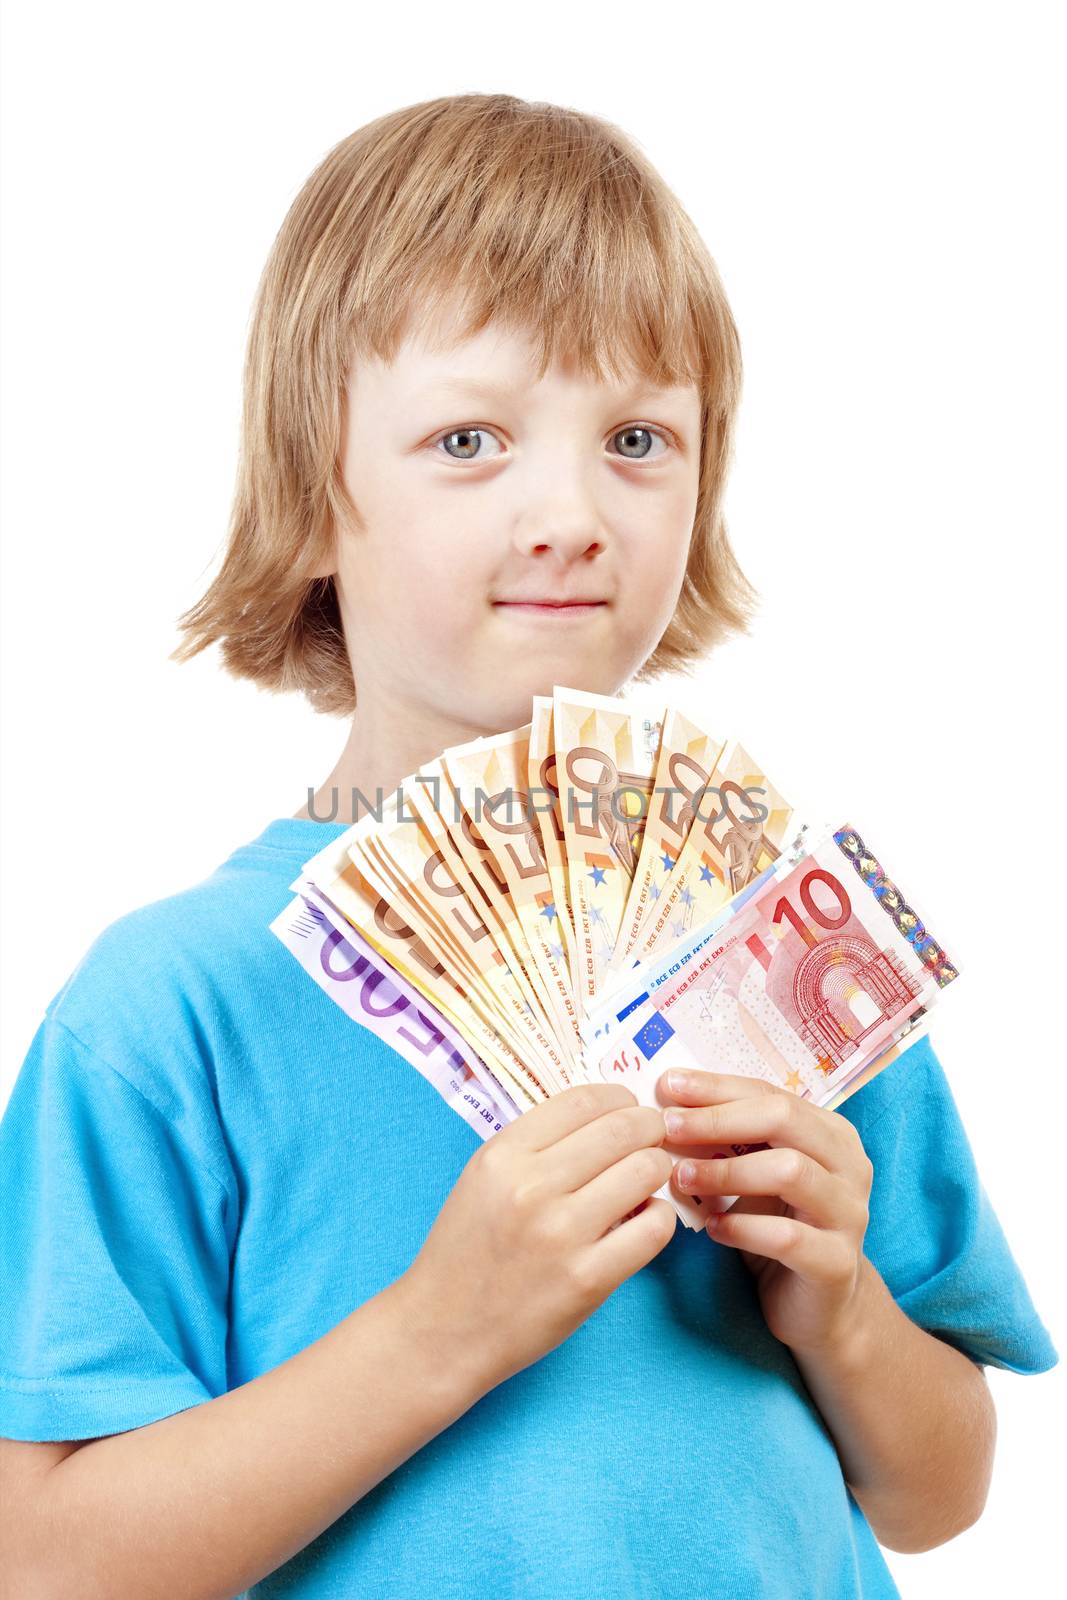 BOY WITH BLOND HAIR HOLDING UP EURO BANKNOTES.